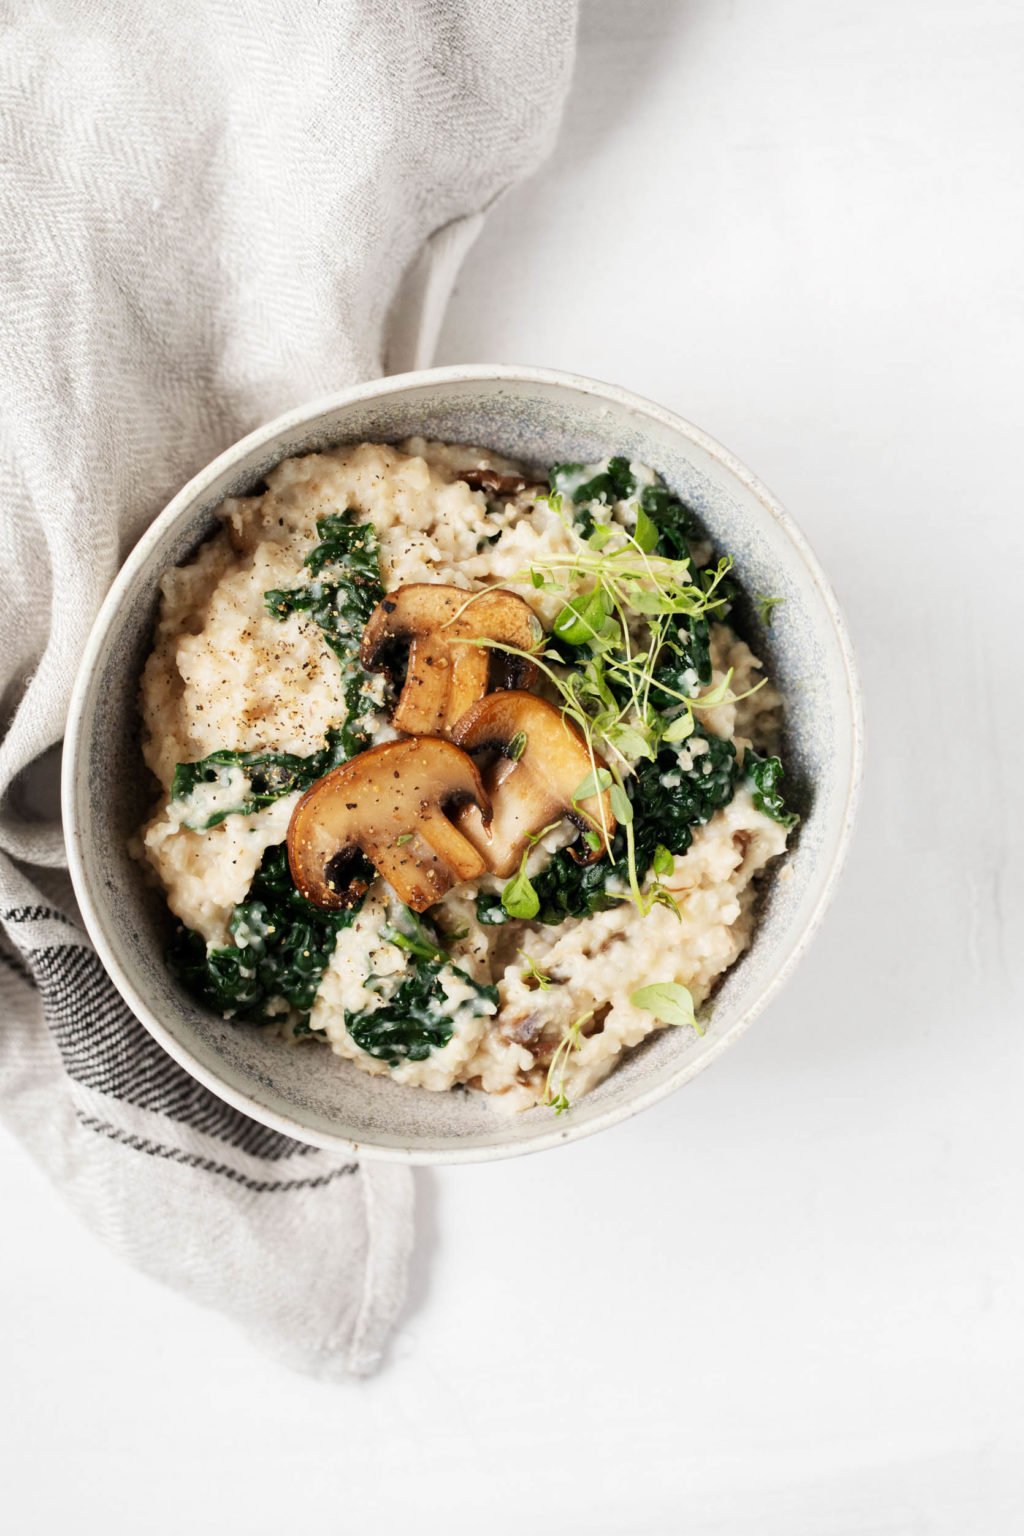 A small bowl of plant-based, savory oatmeal with mushrooms and greens, accompanied by a cloth napkin.